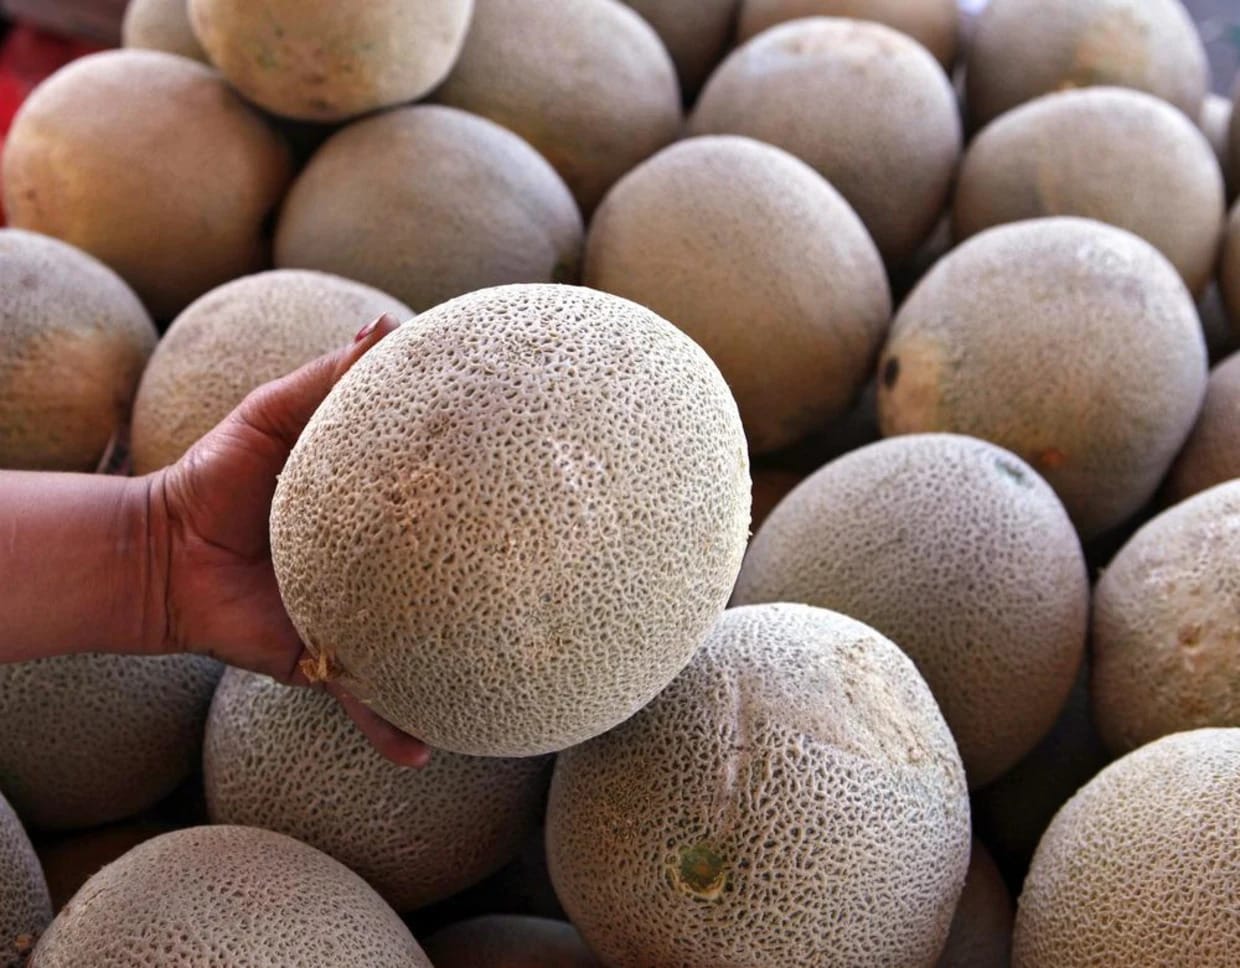 Salmonella Outbreak Linked to Cantaloupes Leads to Two Deaths and Expanding Recalls